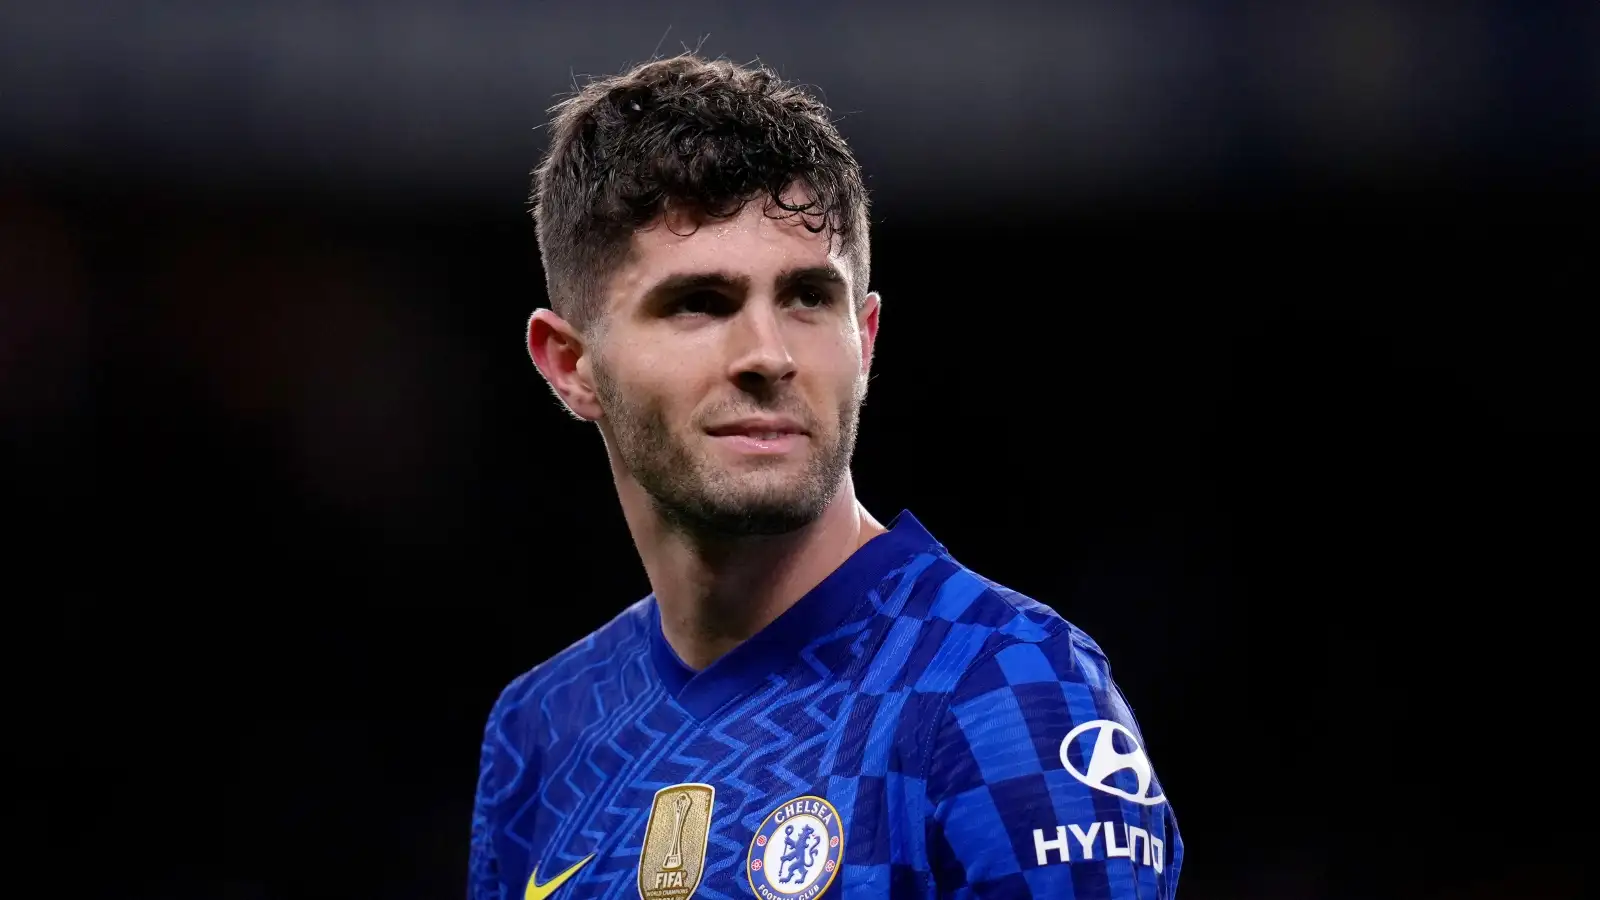 Chelsea's Christian Pulisic likened to Lionel Messi and Cristiano